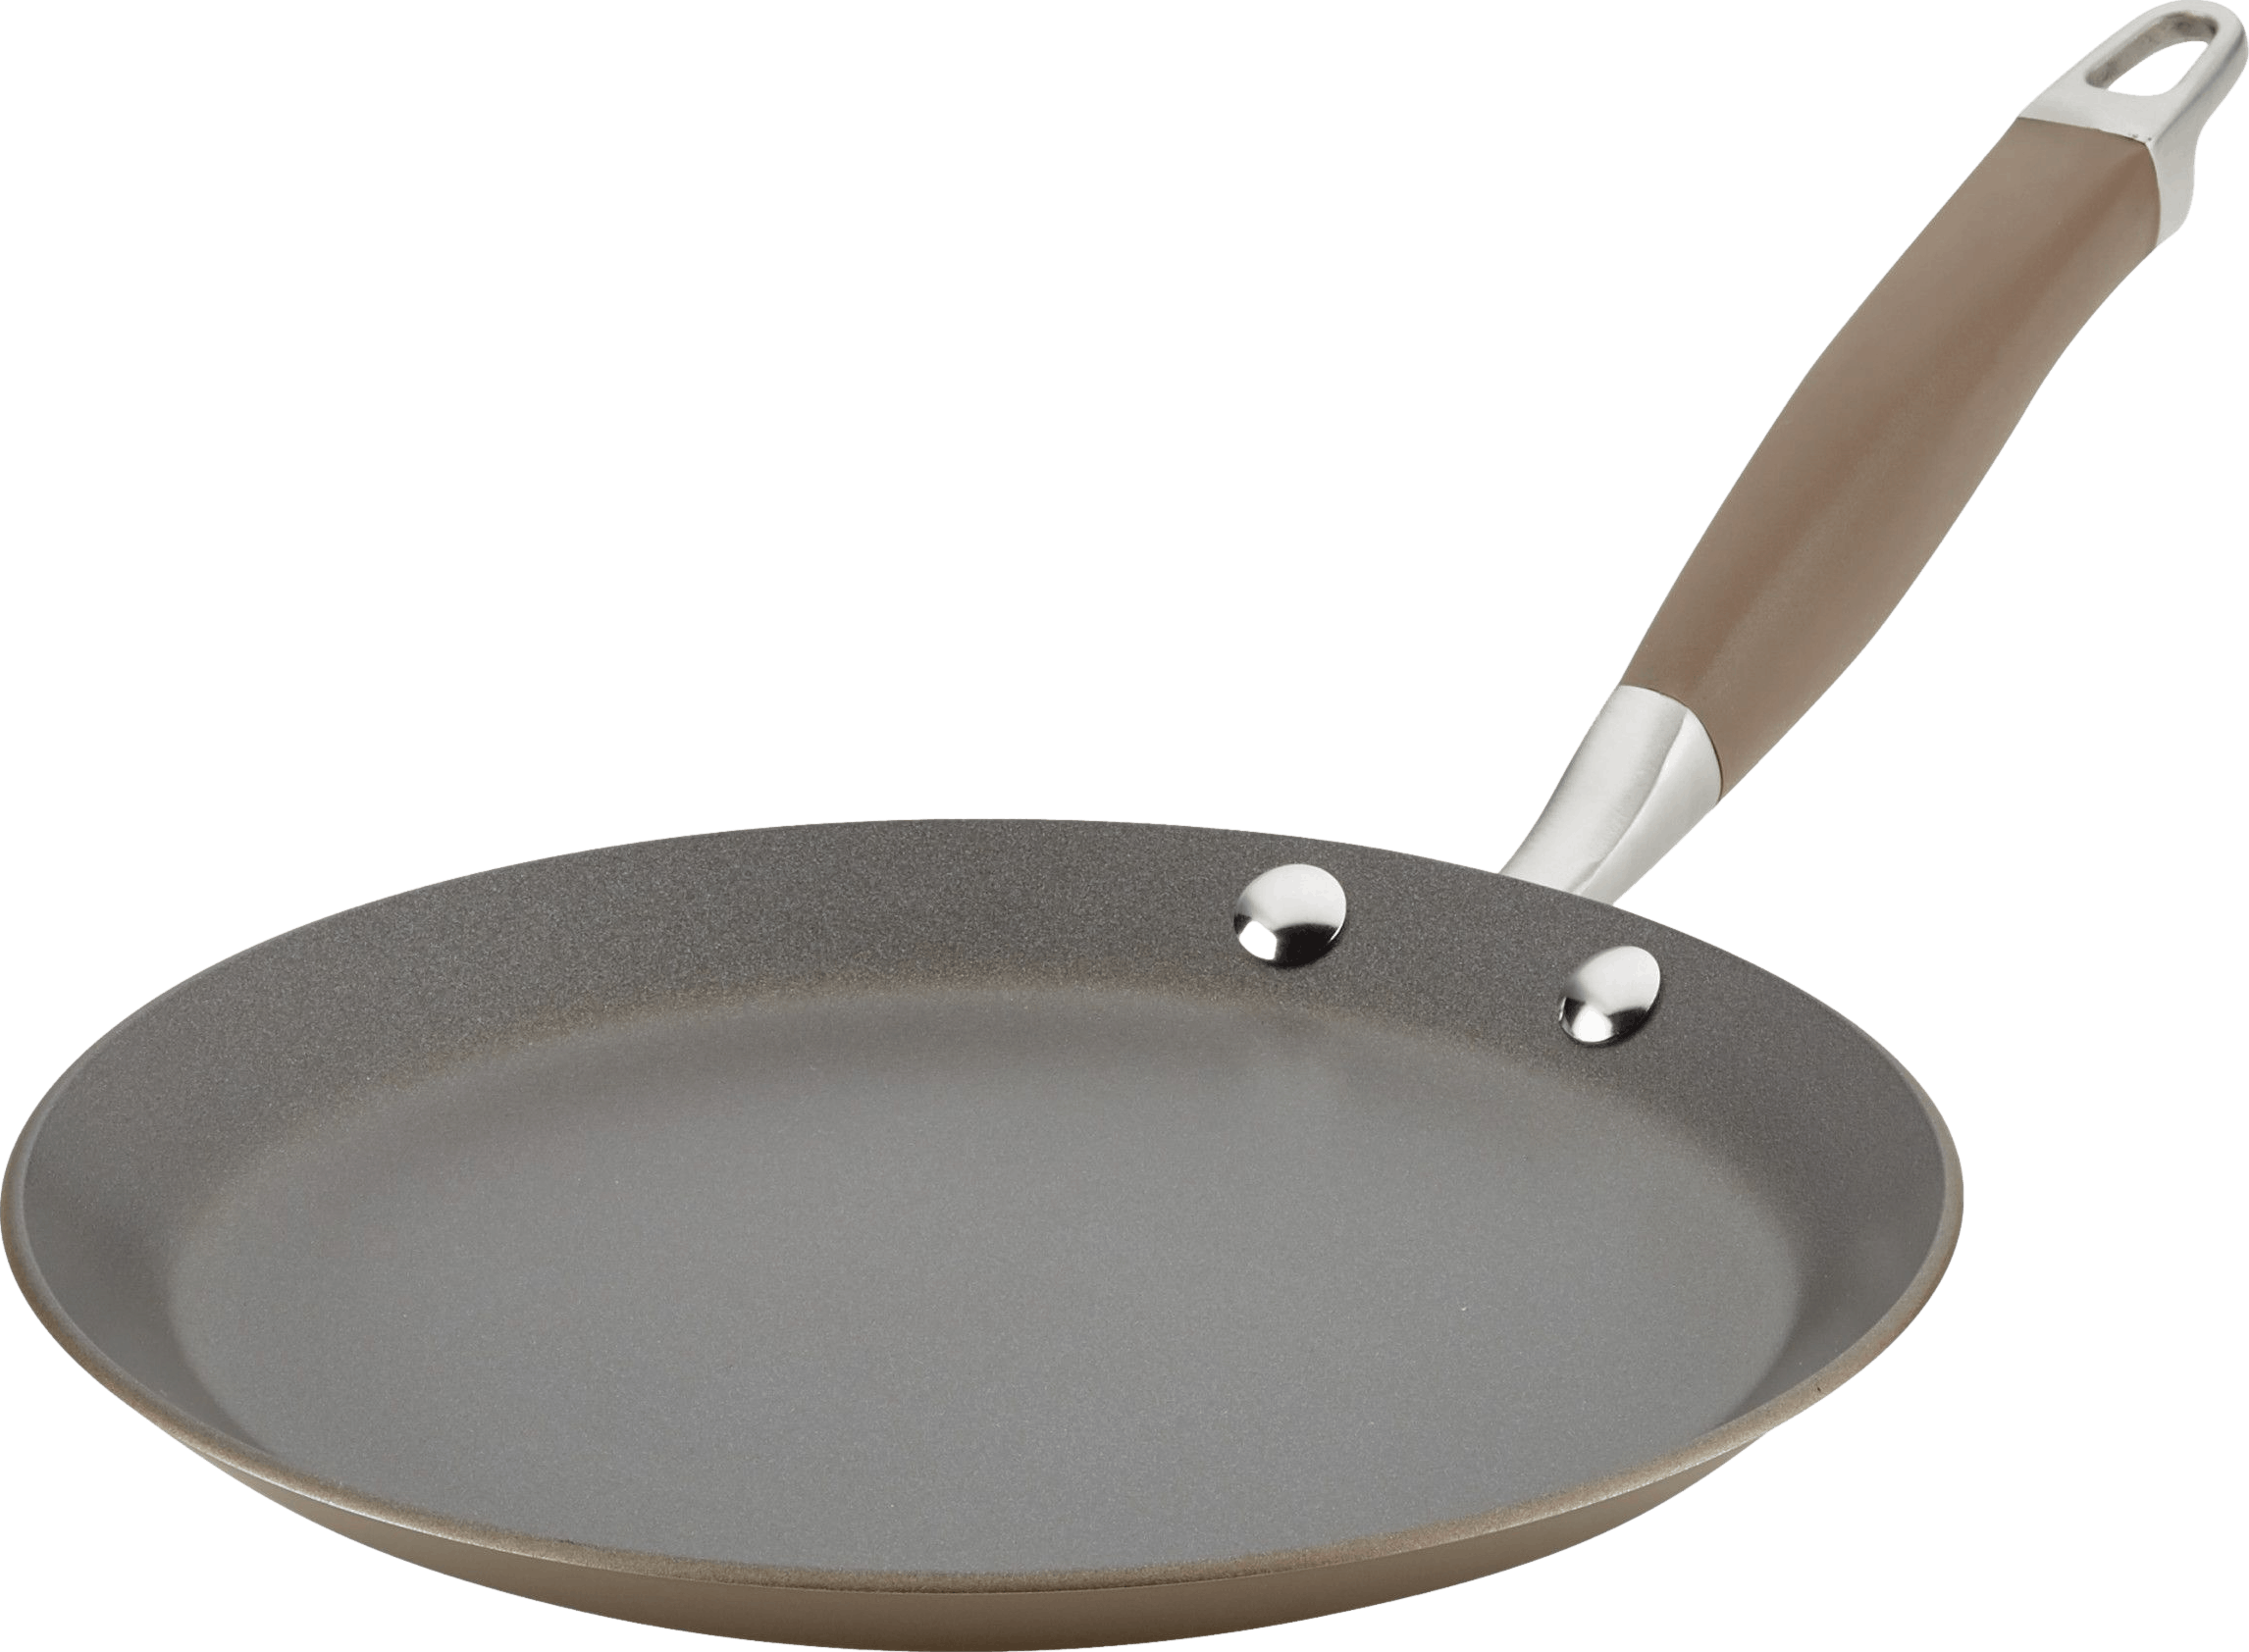 OXO Obsidian Carbon Steel 10 Crepe Pan with Silicone Sleeve Black